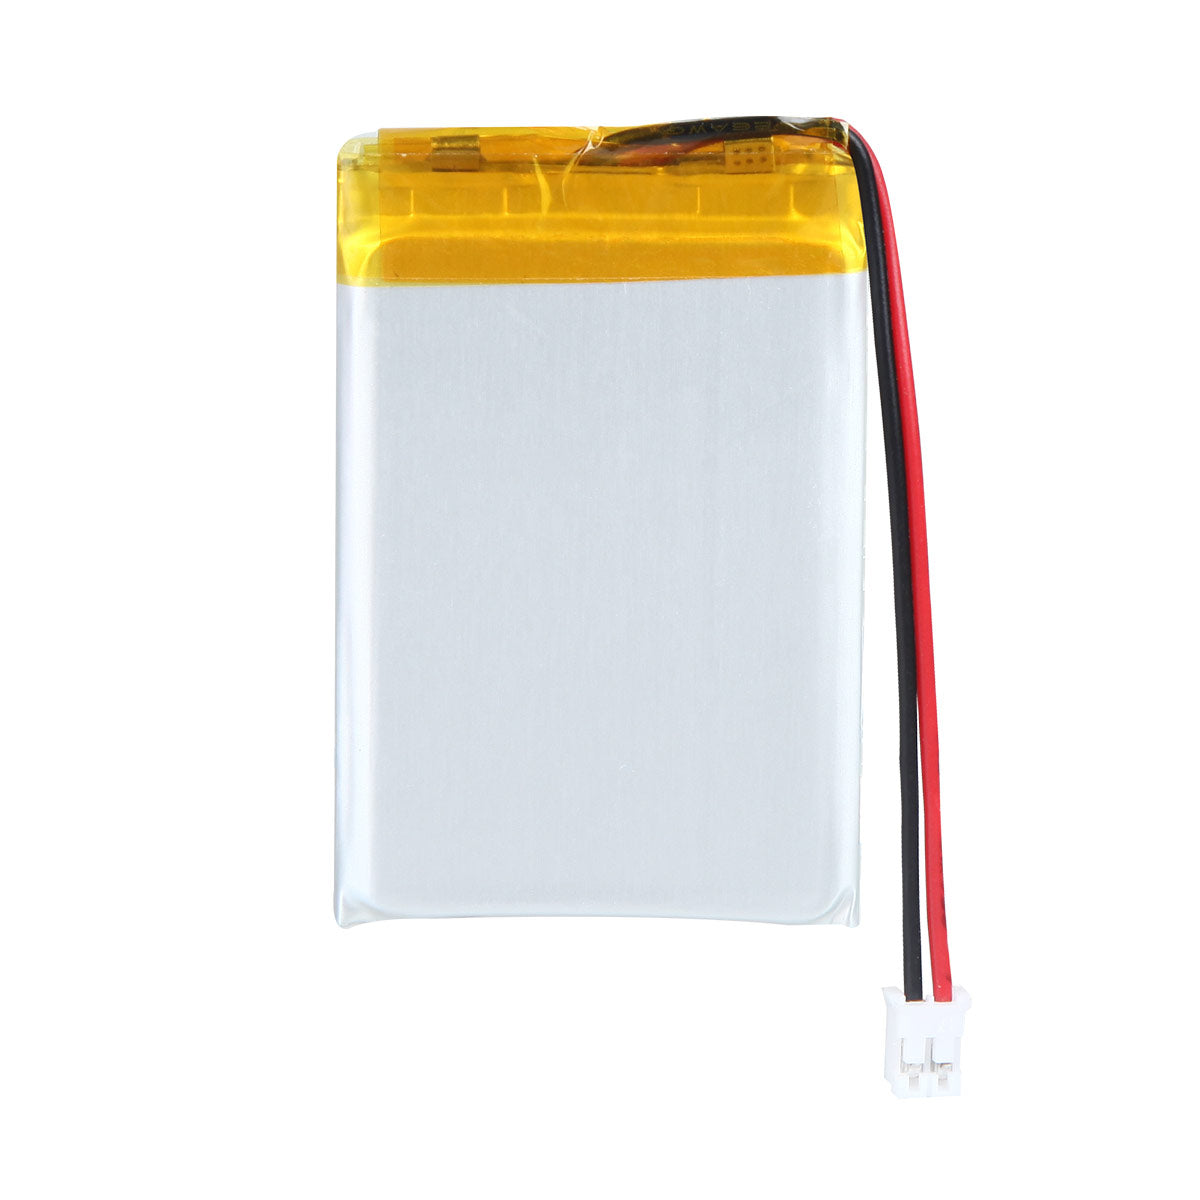 YDL 3.7V 1000mAh 503550 Rechargeable Lithium Polymer Battery Length 52mm